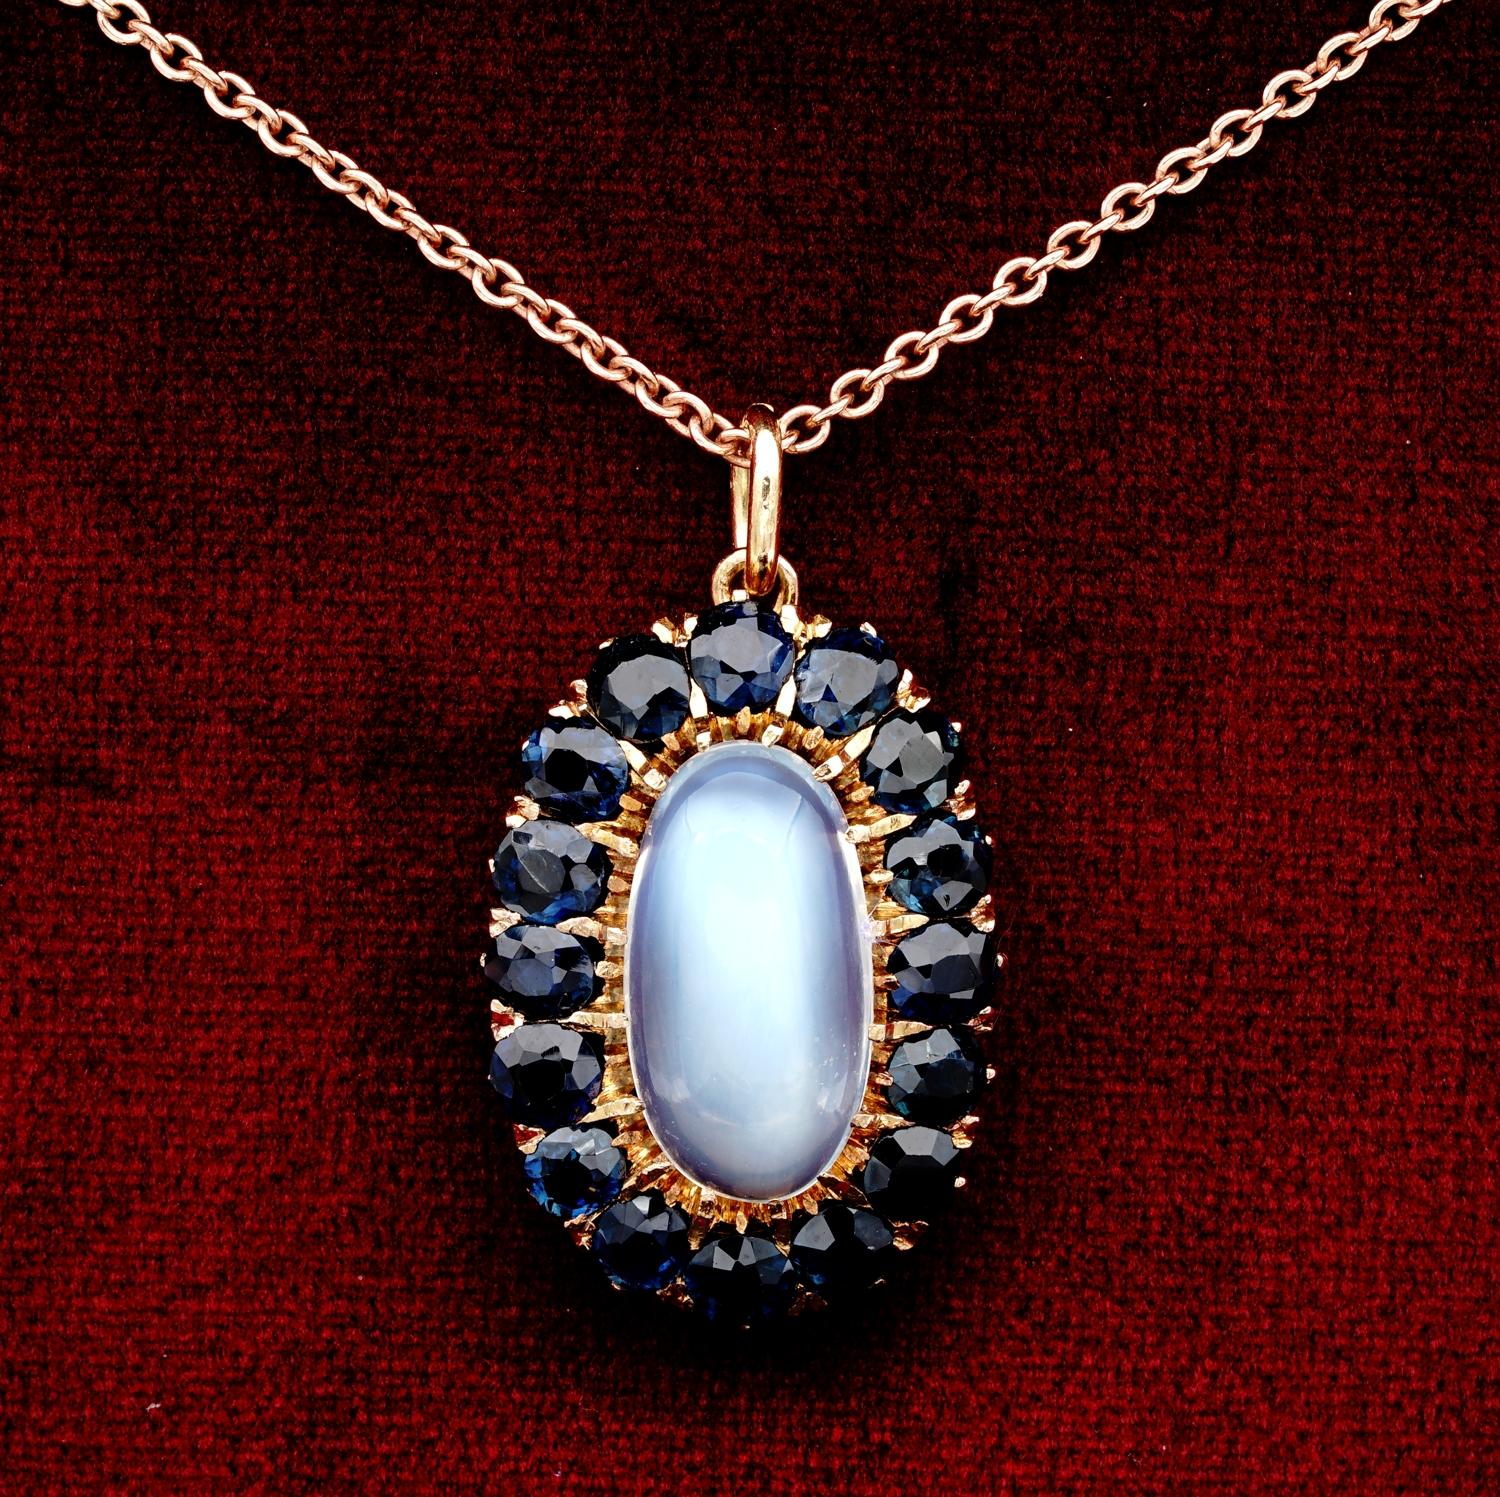 Dropped from Moon!

This truly gorgeous, late Edwardian pendant, is a lovely composition of gemstones: shimmering Moonstone, old cut opulence of natural sapphires
Mounted in 18 Kt rose gold with a lovely elongated shape taking inspiration by the